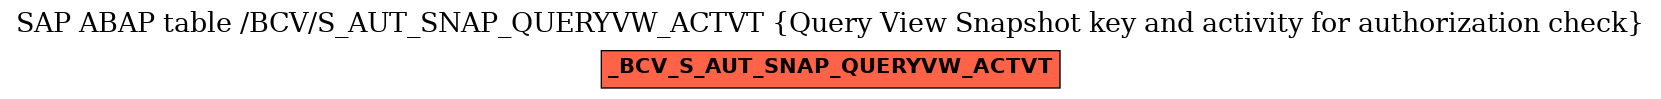 E-R Diagram for table /BCV/S_AUT_SNAP_QUERYVW_ACTVT (Query View Snapshot key and activity for authorization check)